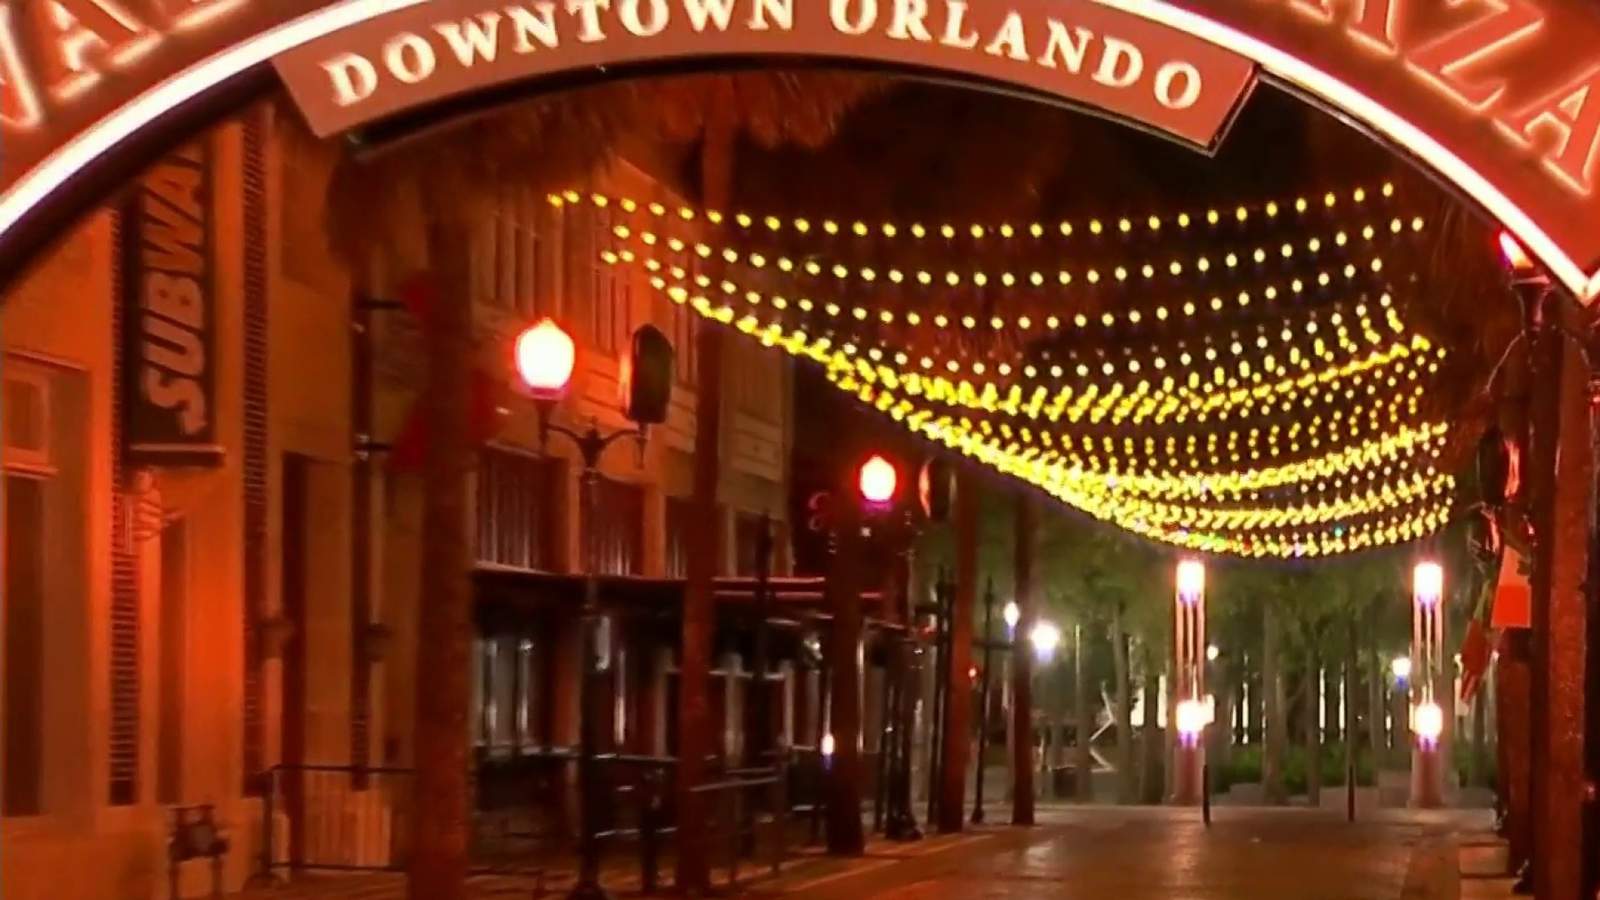 Workers left downtown Orlando. Will they ever come back?